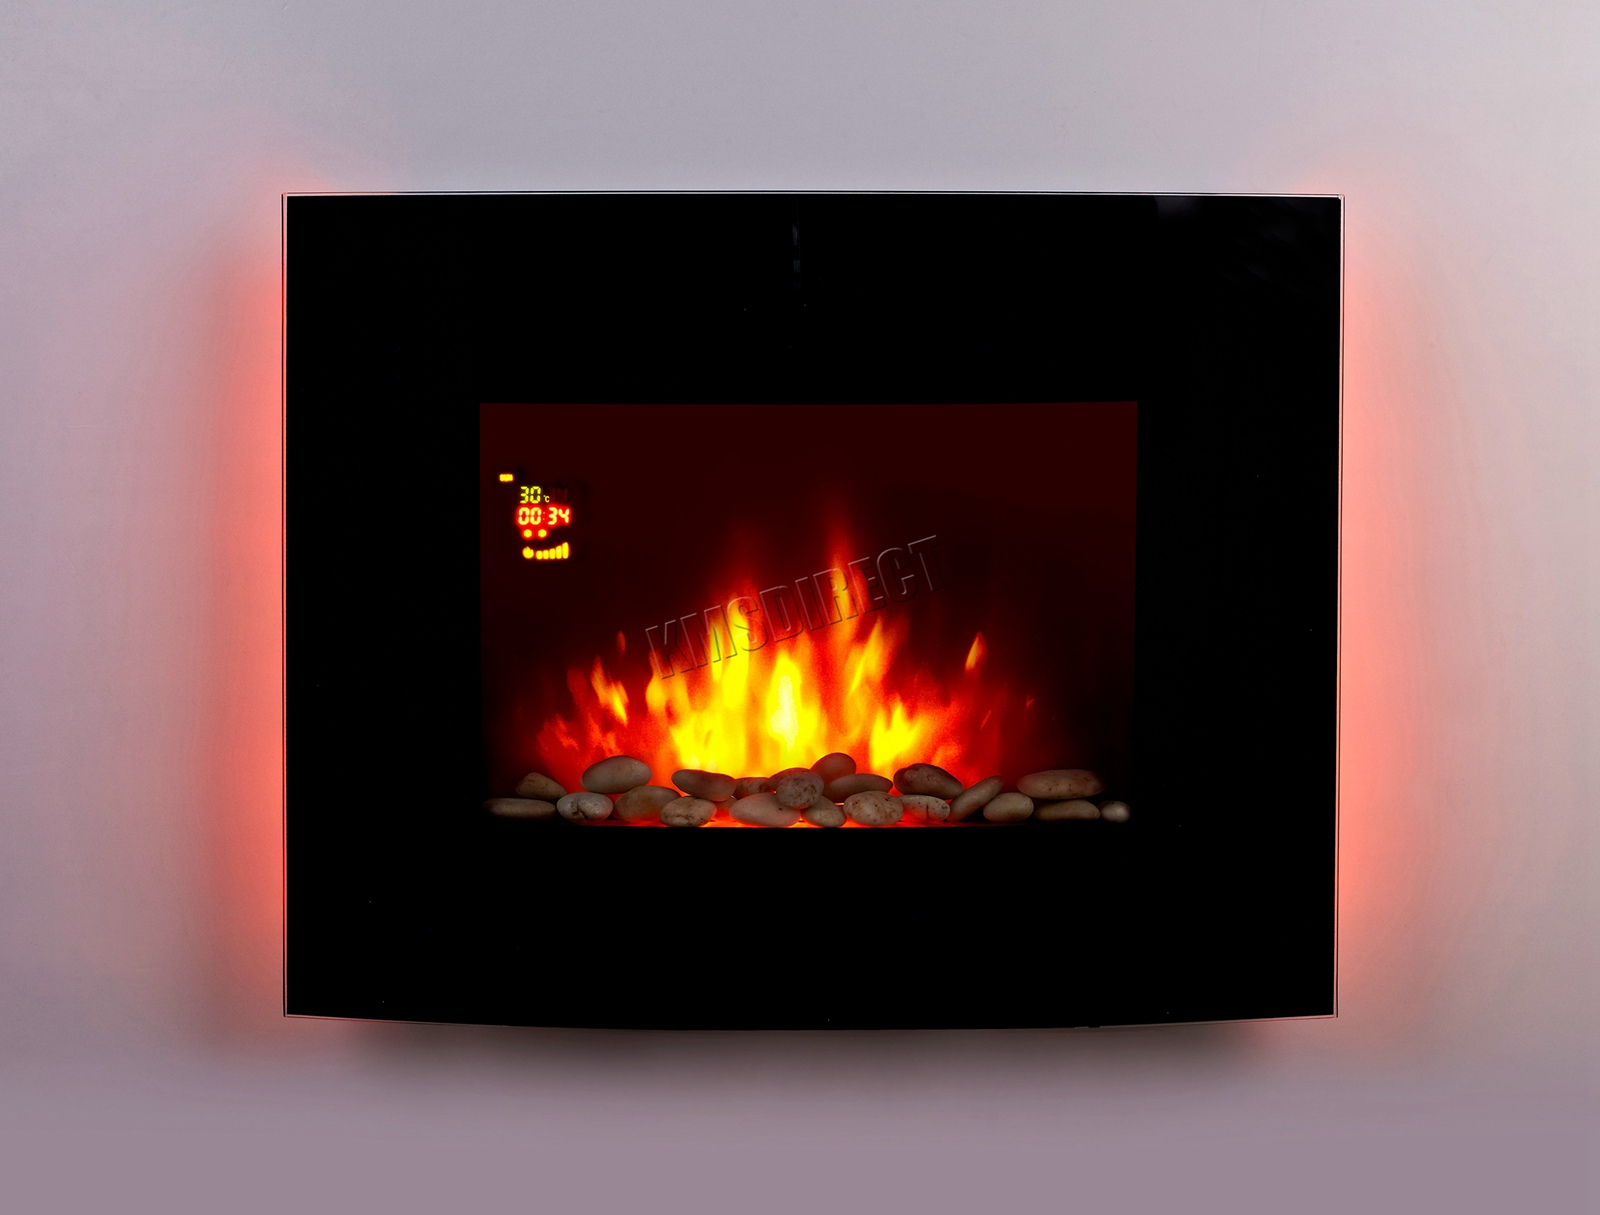 Electric Wall Mounted Fireplaces Clearance Awesome Details About Wall Mounted Electric Fireplace Glass Heater Fire Remote Control Led Backlit New